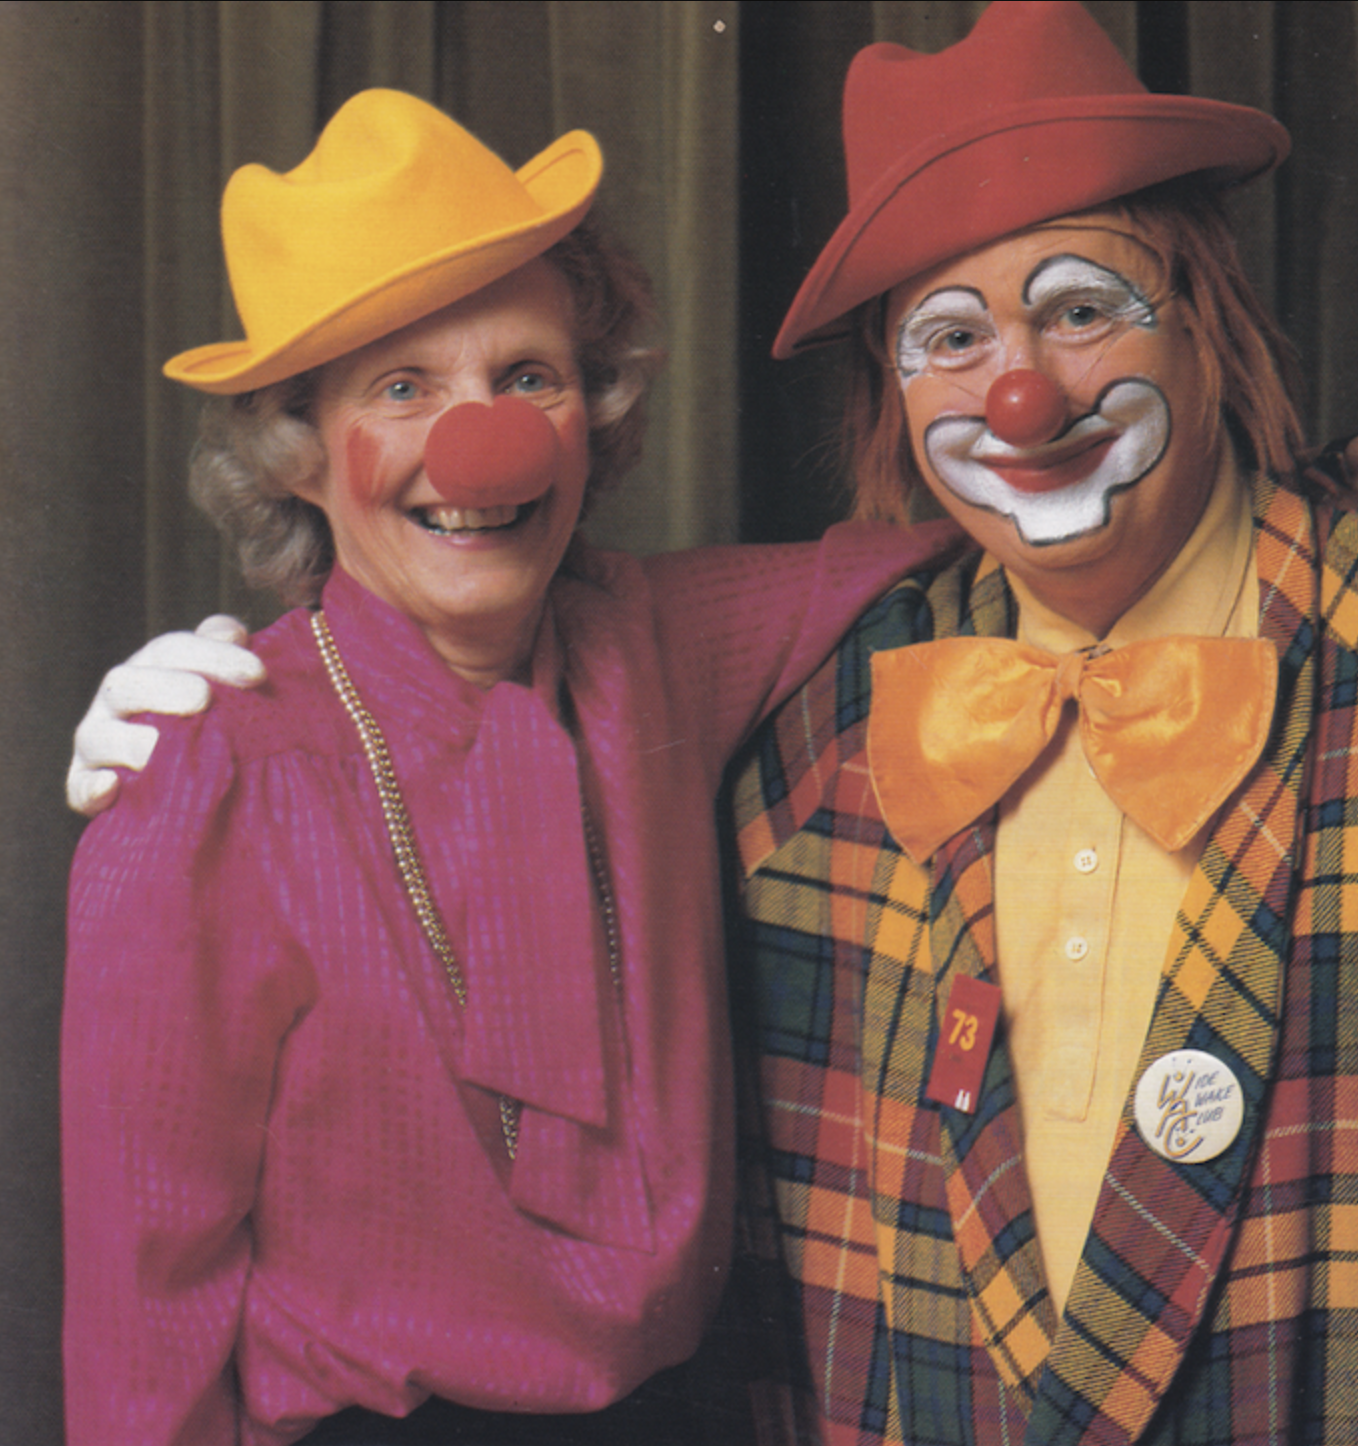 Colour photograph of a man and woman. The man on the right is dressed as a clown. The woman on the left is wearing a foam red nose.